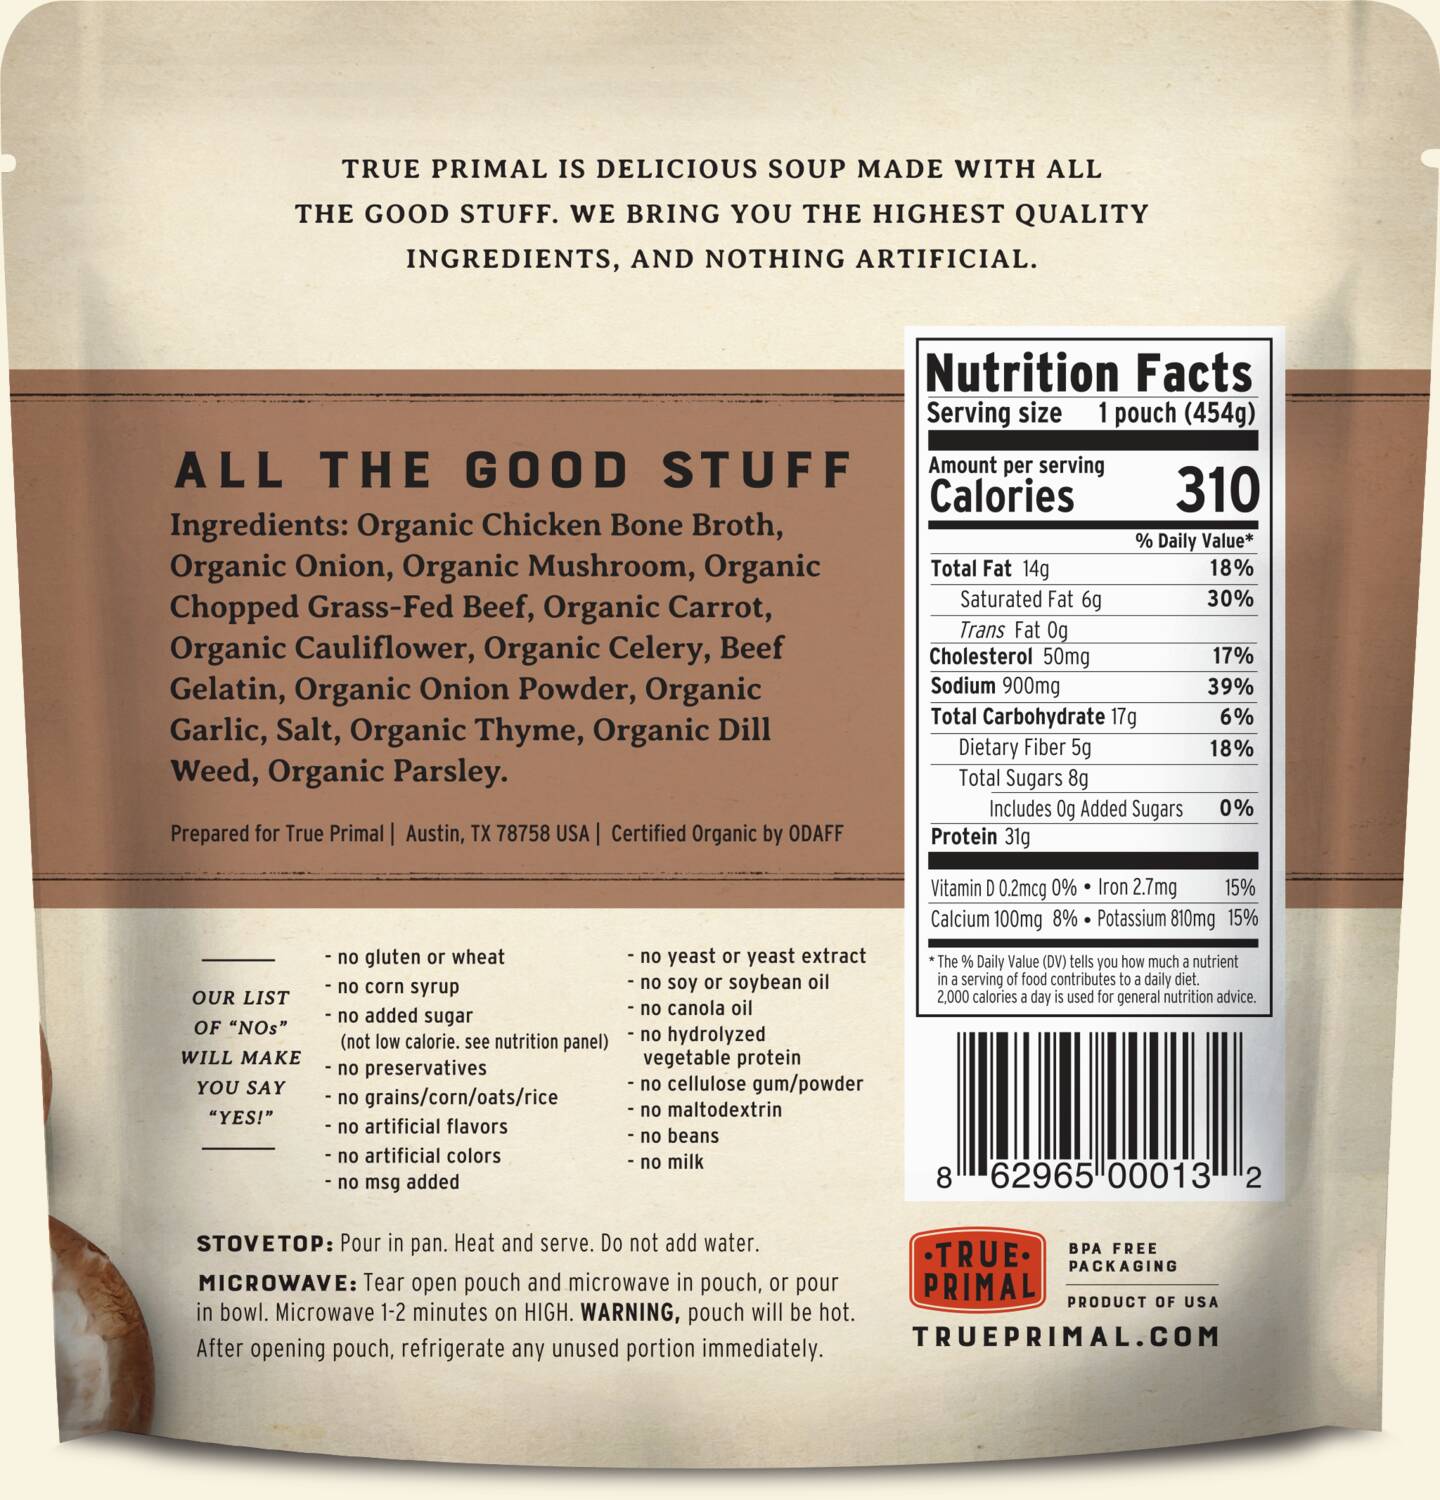 True Primal Beef and Mushroom Organic Soup in pouch, back of label. UPC: 862965000132.